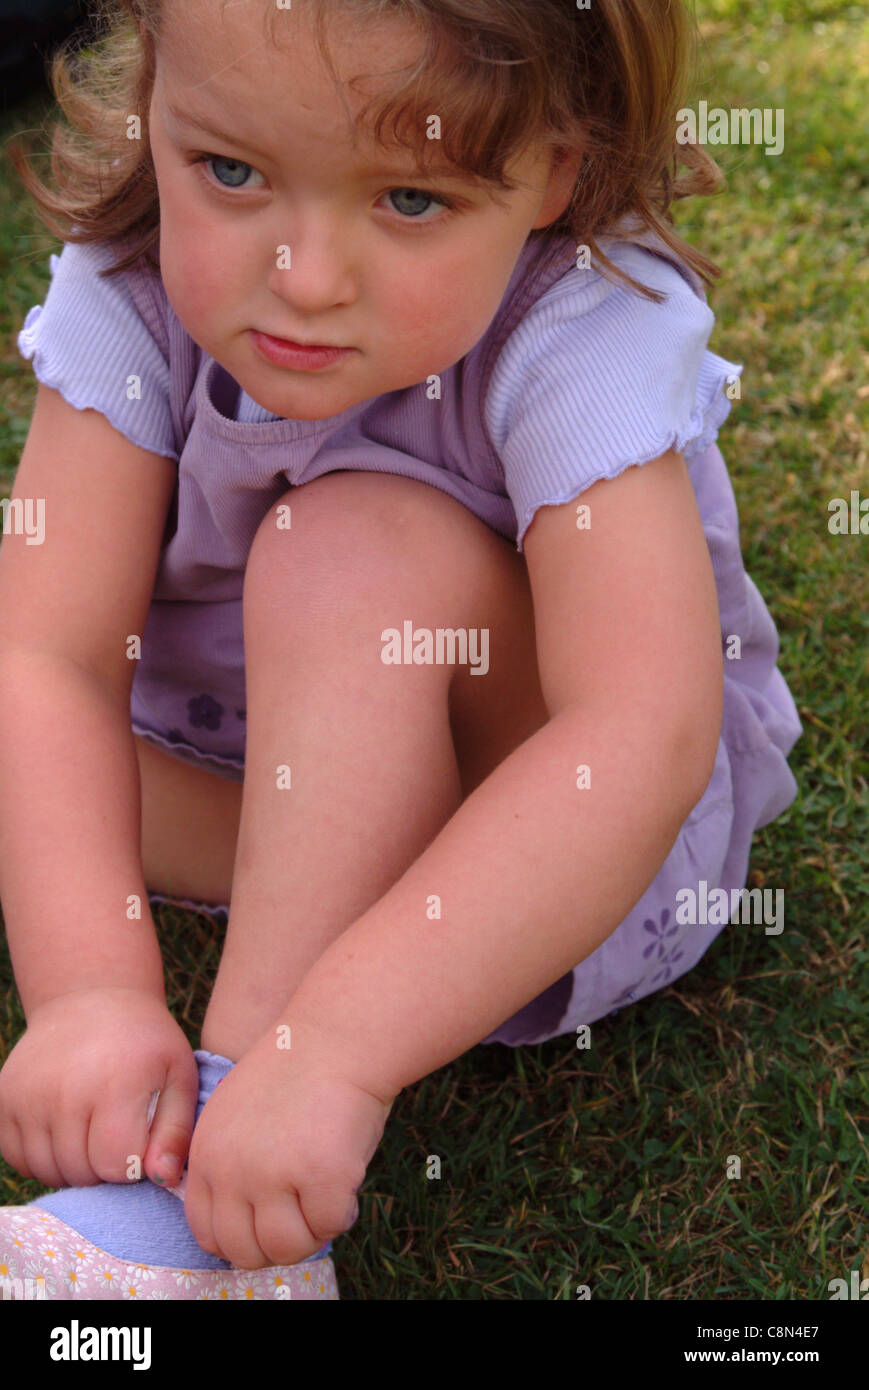 Little girl putting her shoes on outside Stock Photo